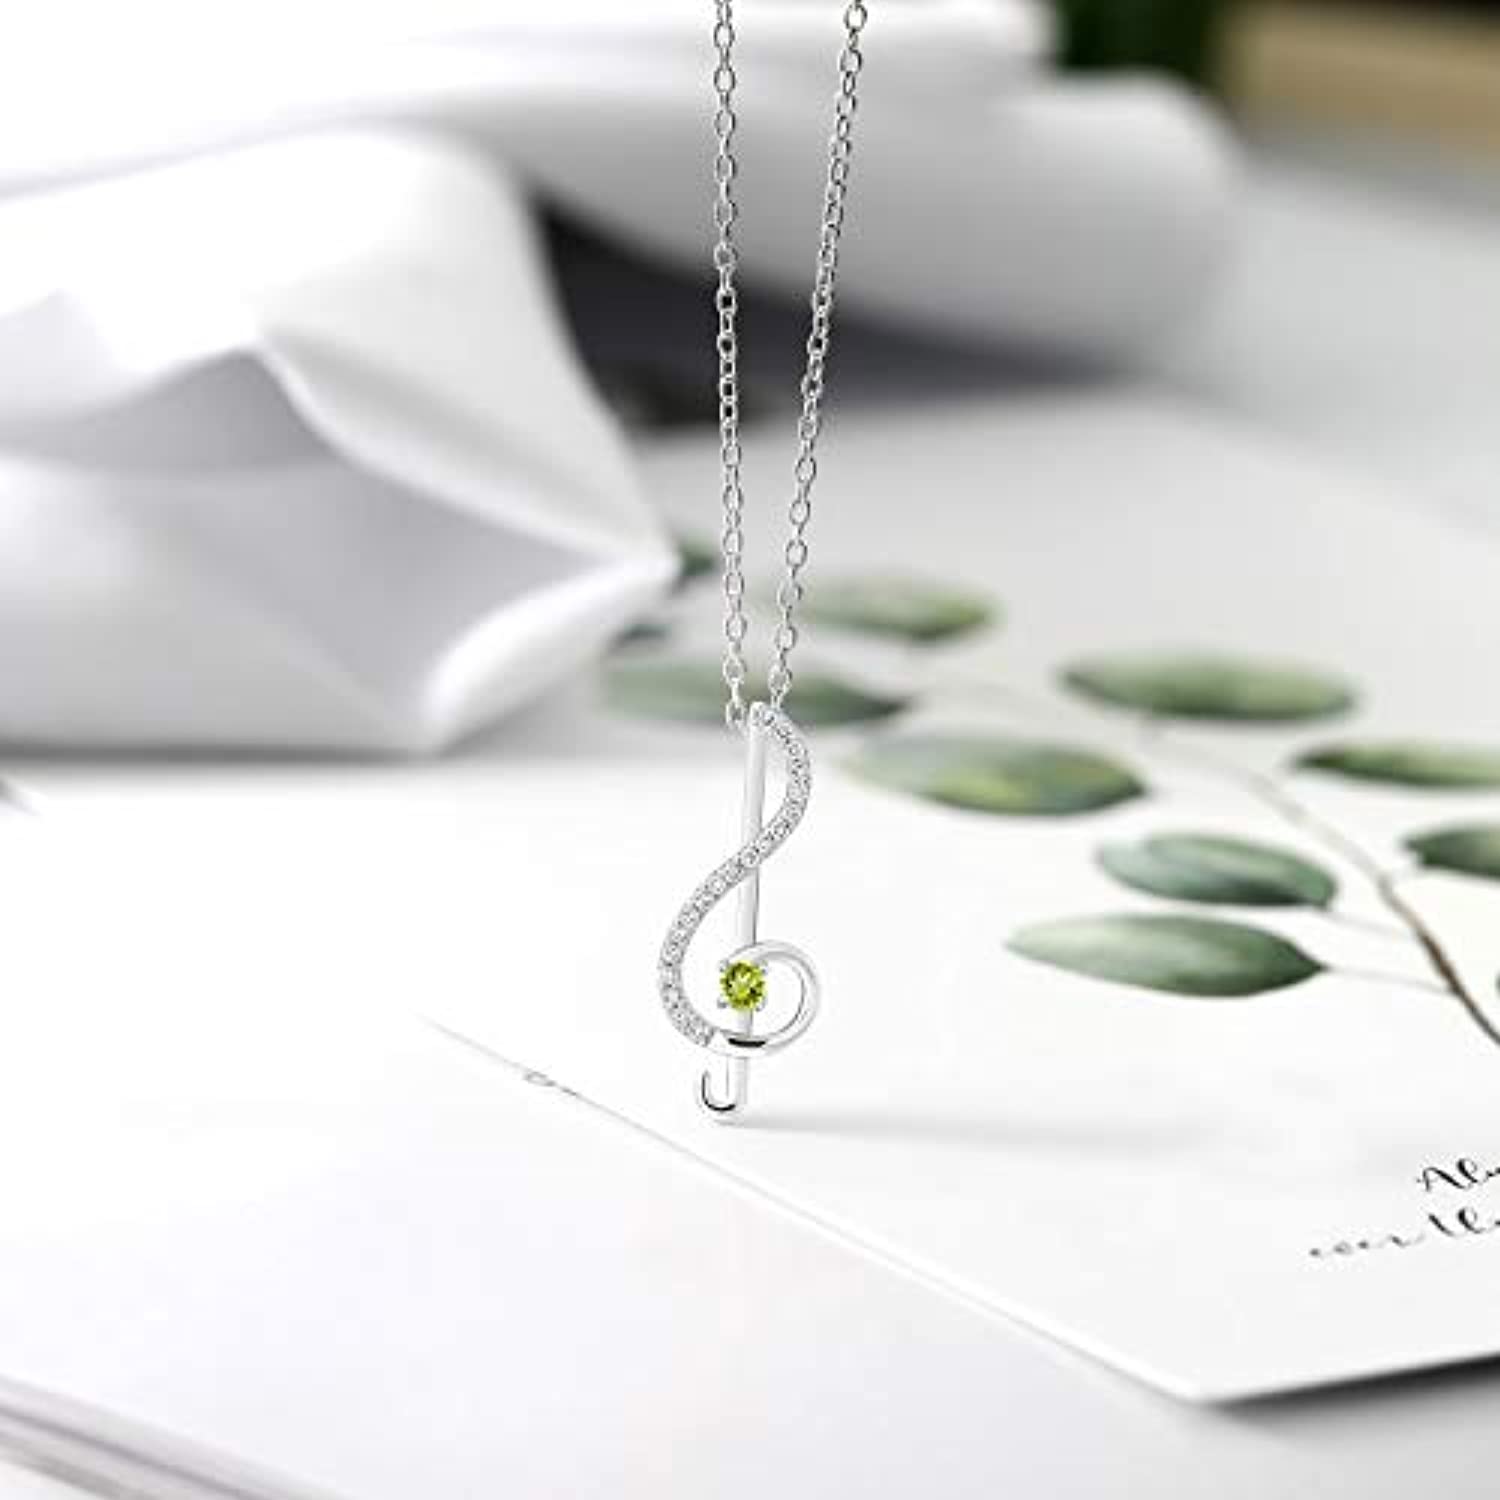 Keren Hanan Inspired by Music 925 Silver Treble Clef Green Peridot and Set with White Zirconia